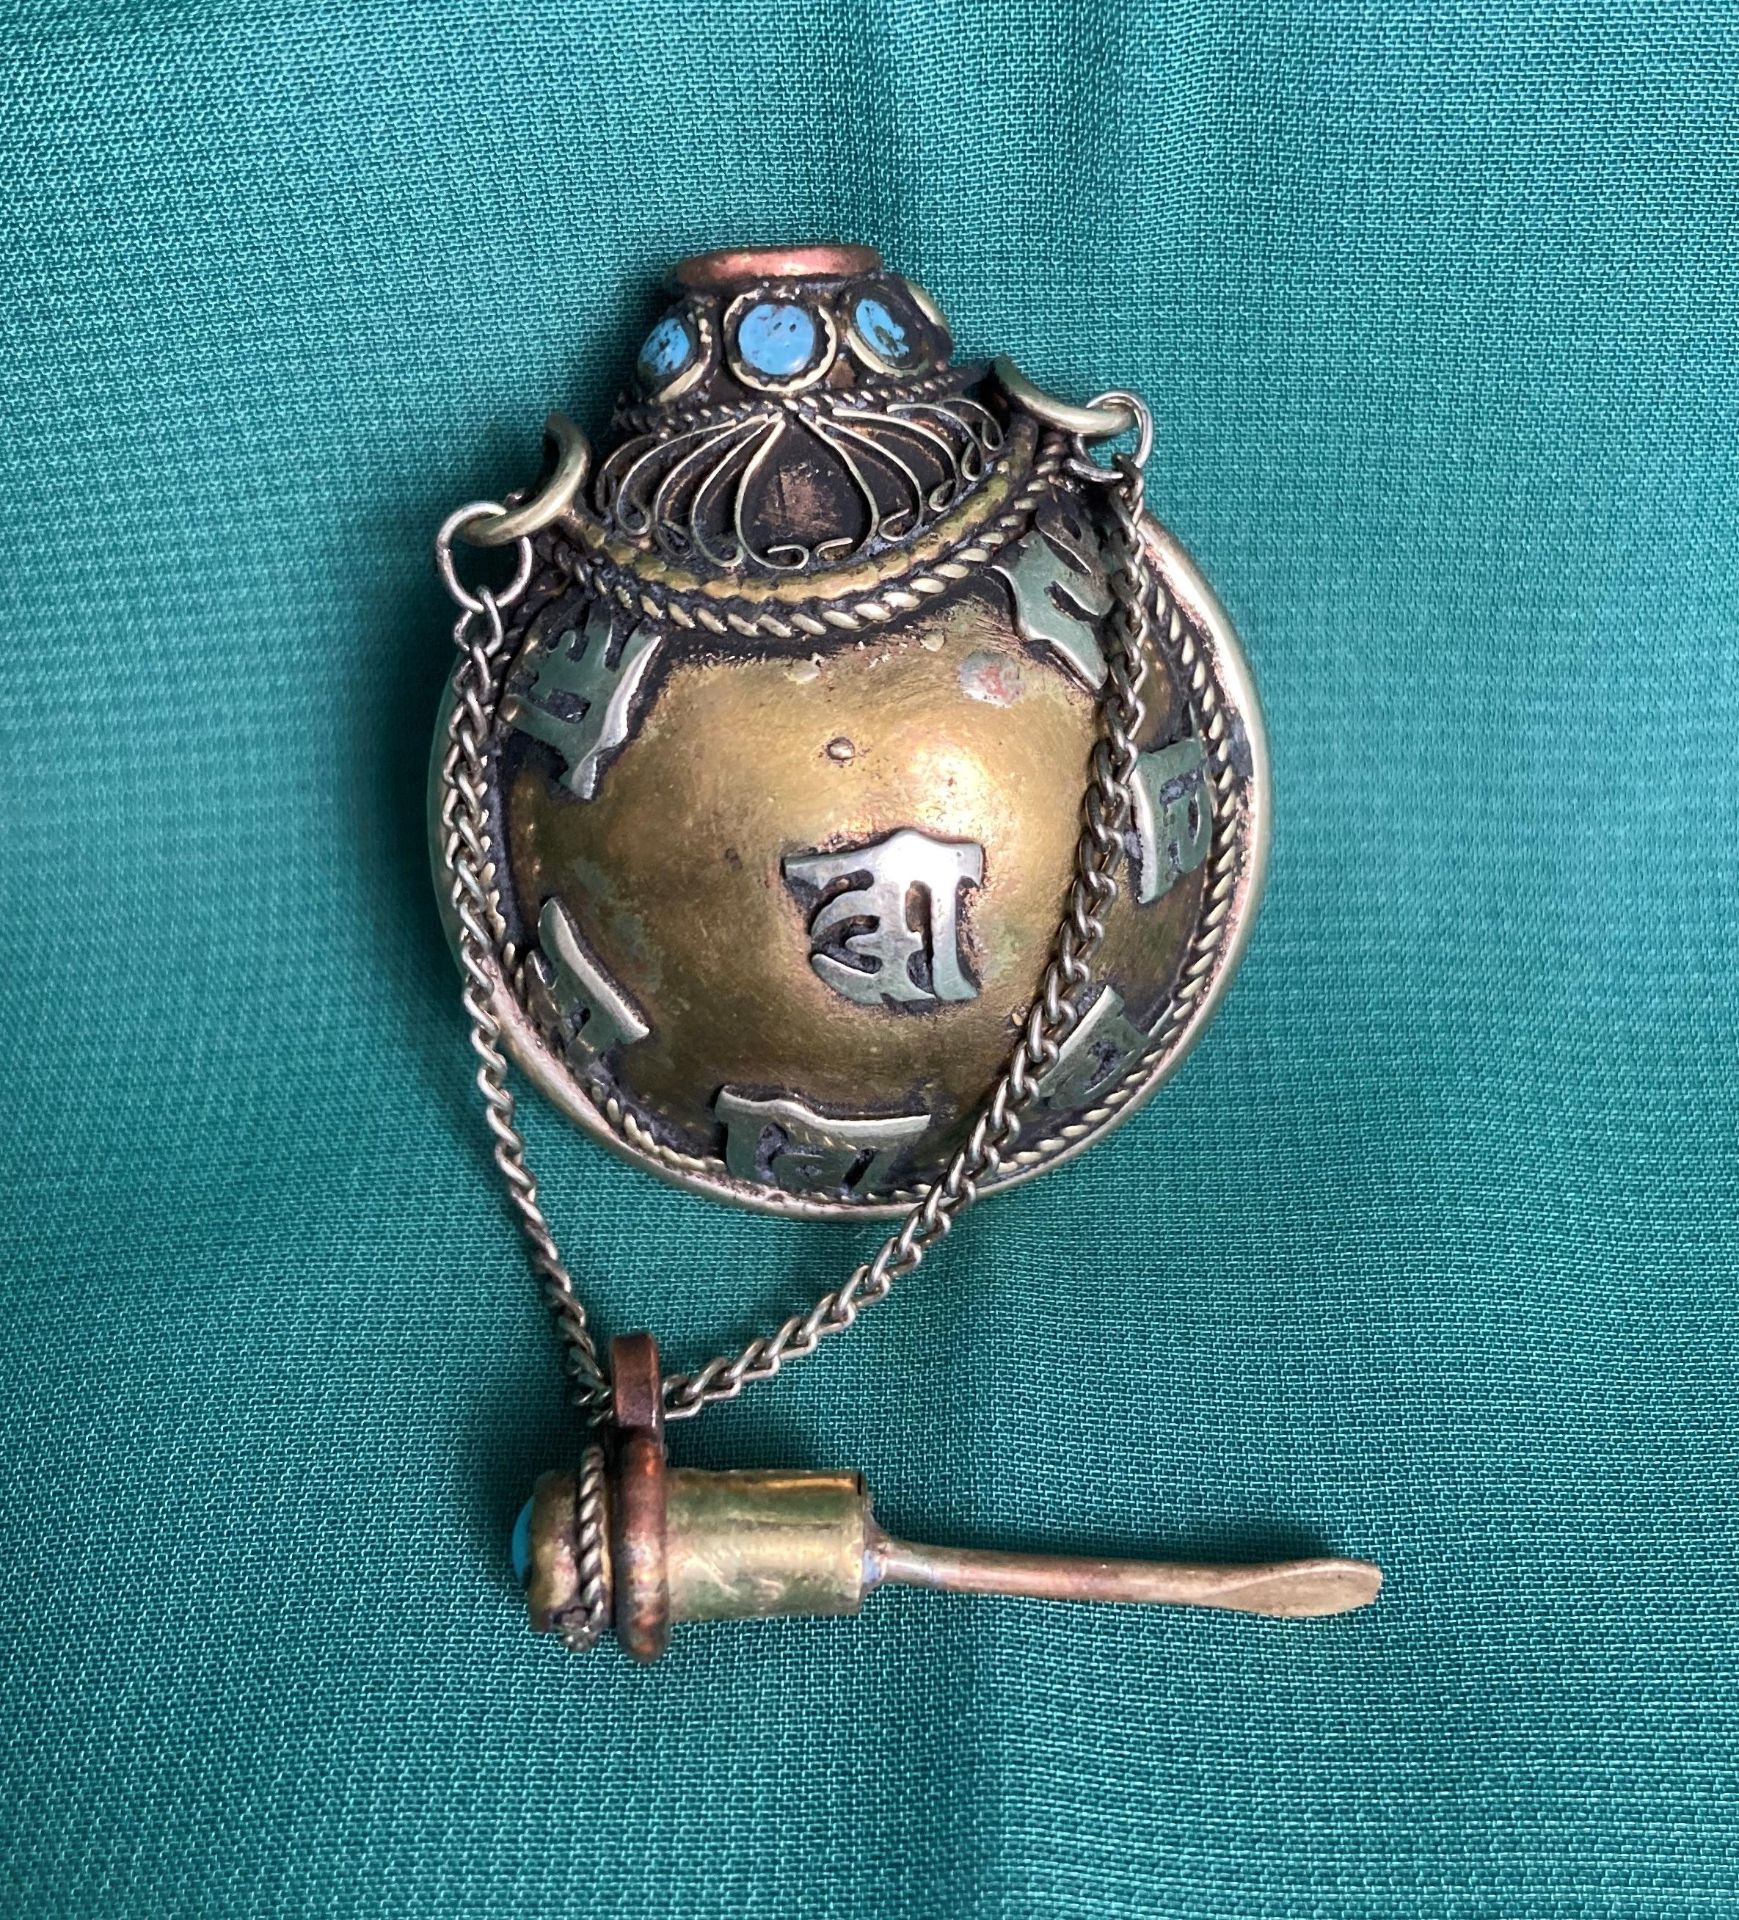 An antique Chinese/Tibetan hand-made metal snuff/opium bottle with light blue stones, - Image 3 of 4